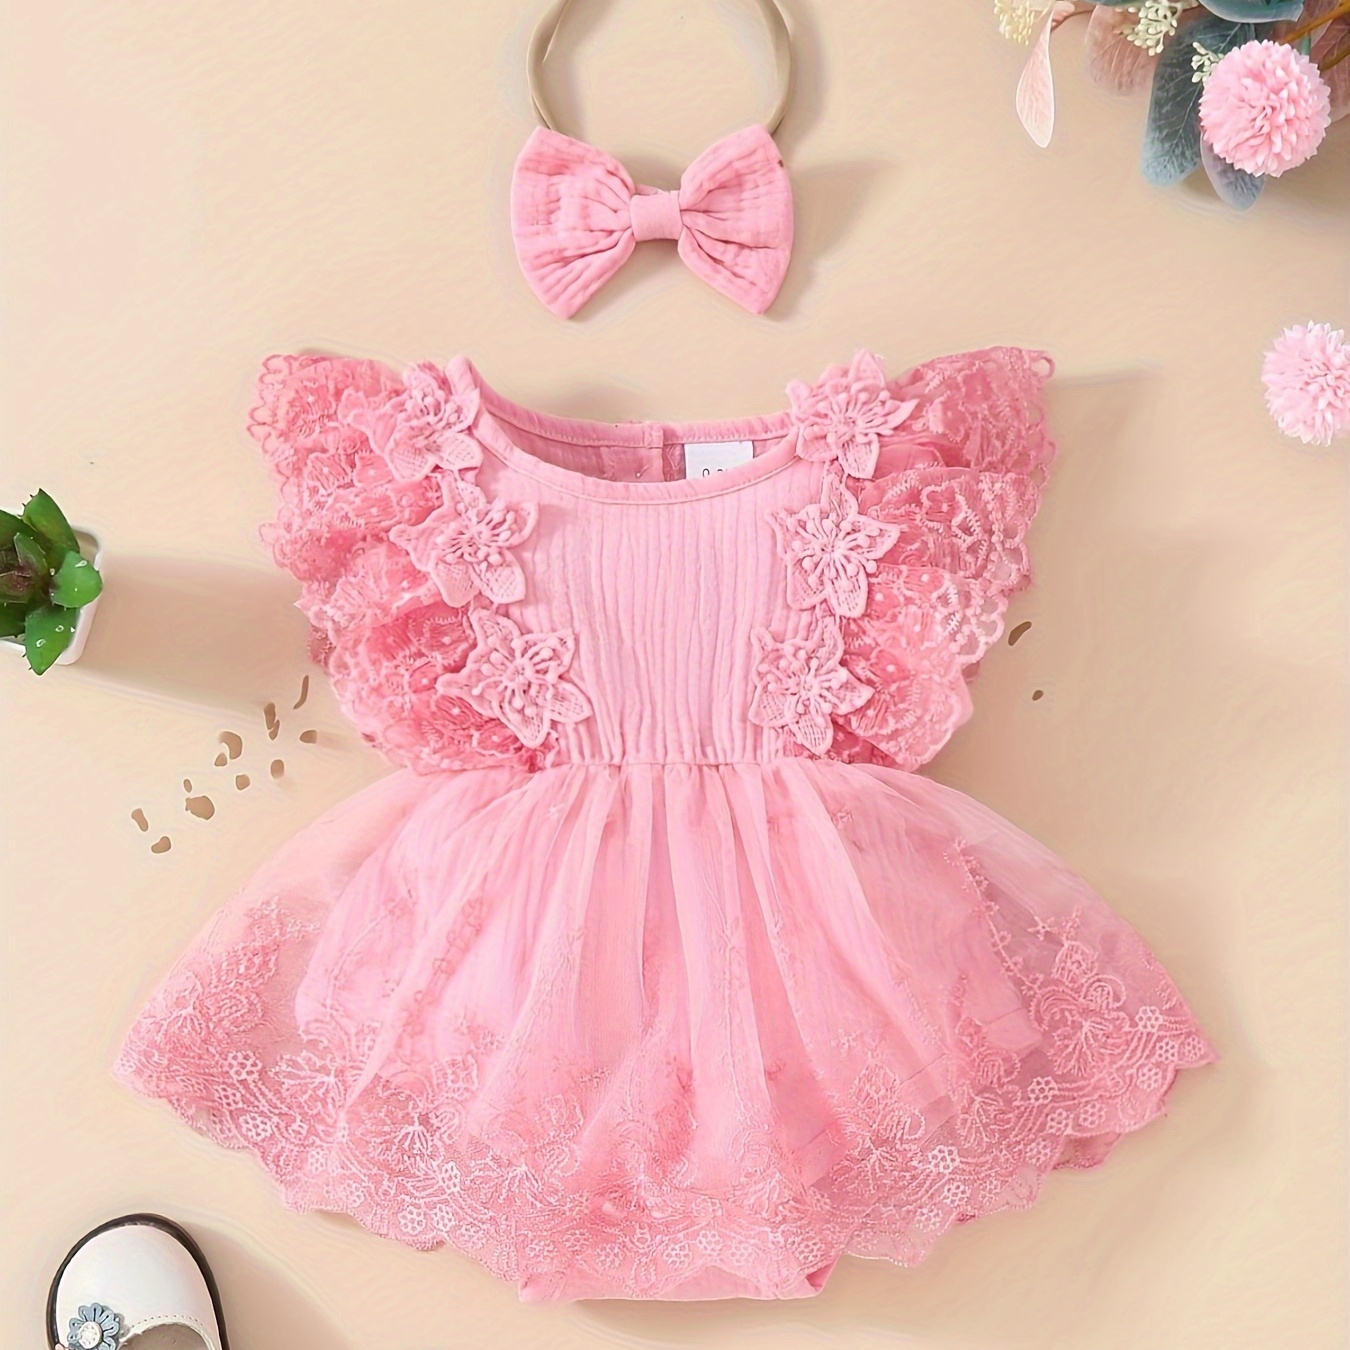 

Baby's Lace Flower Embroidered Mesh Muslin Dress, Solid Color Lovely Sleeveless Dress, Infant & Toddler Girl's Clothing For Summer